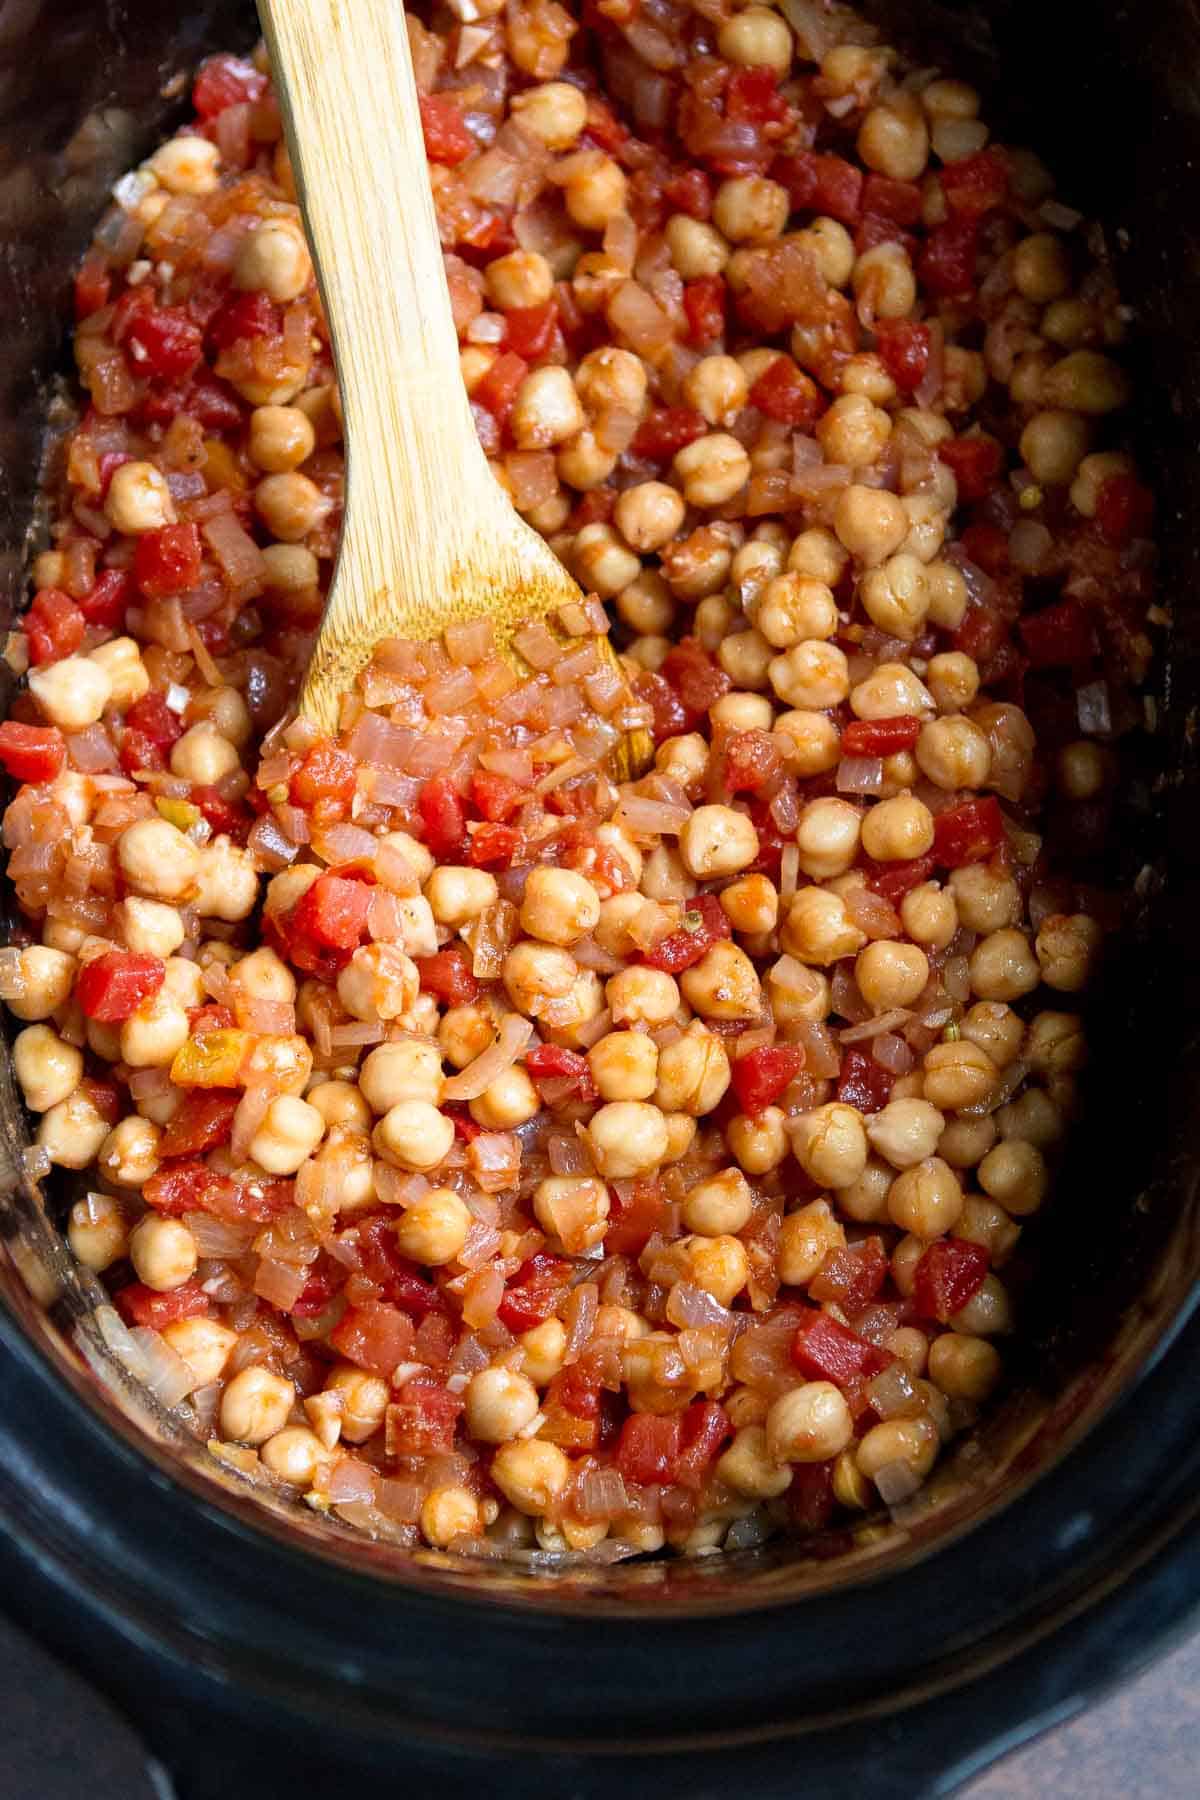 Chickpeas, onions and tomatoes in a crockpot with a wooden spatula.